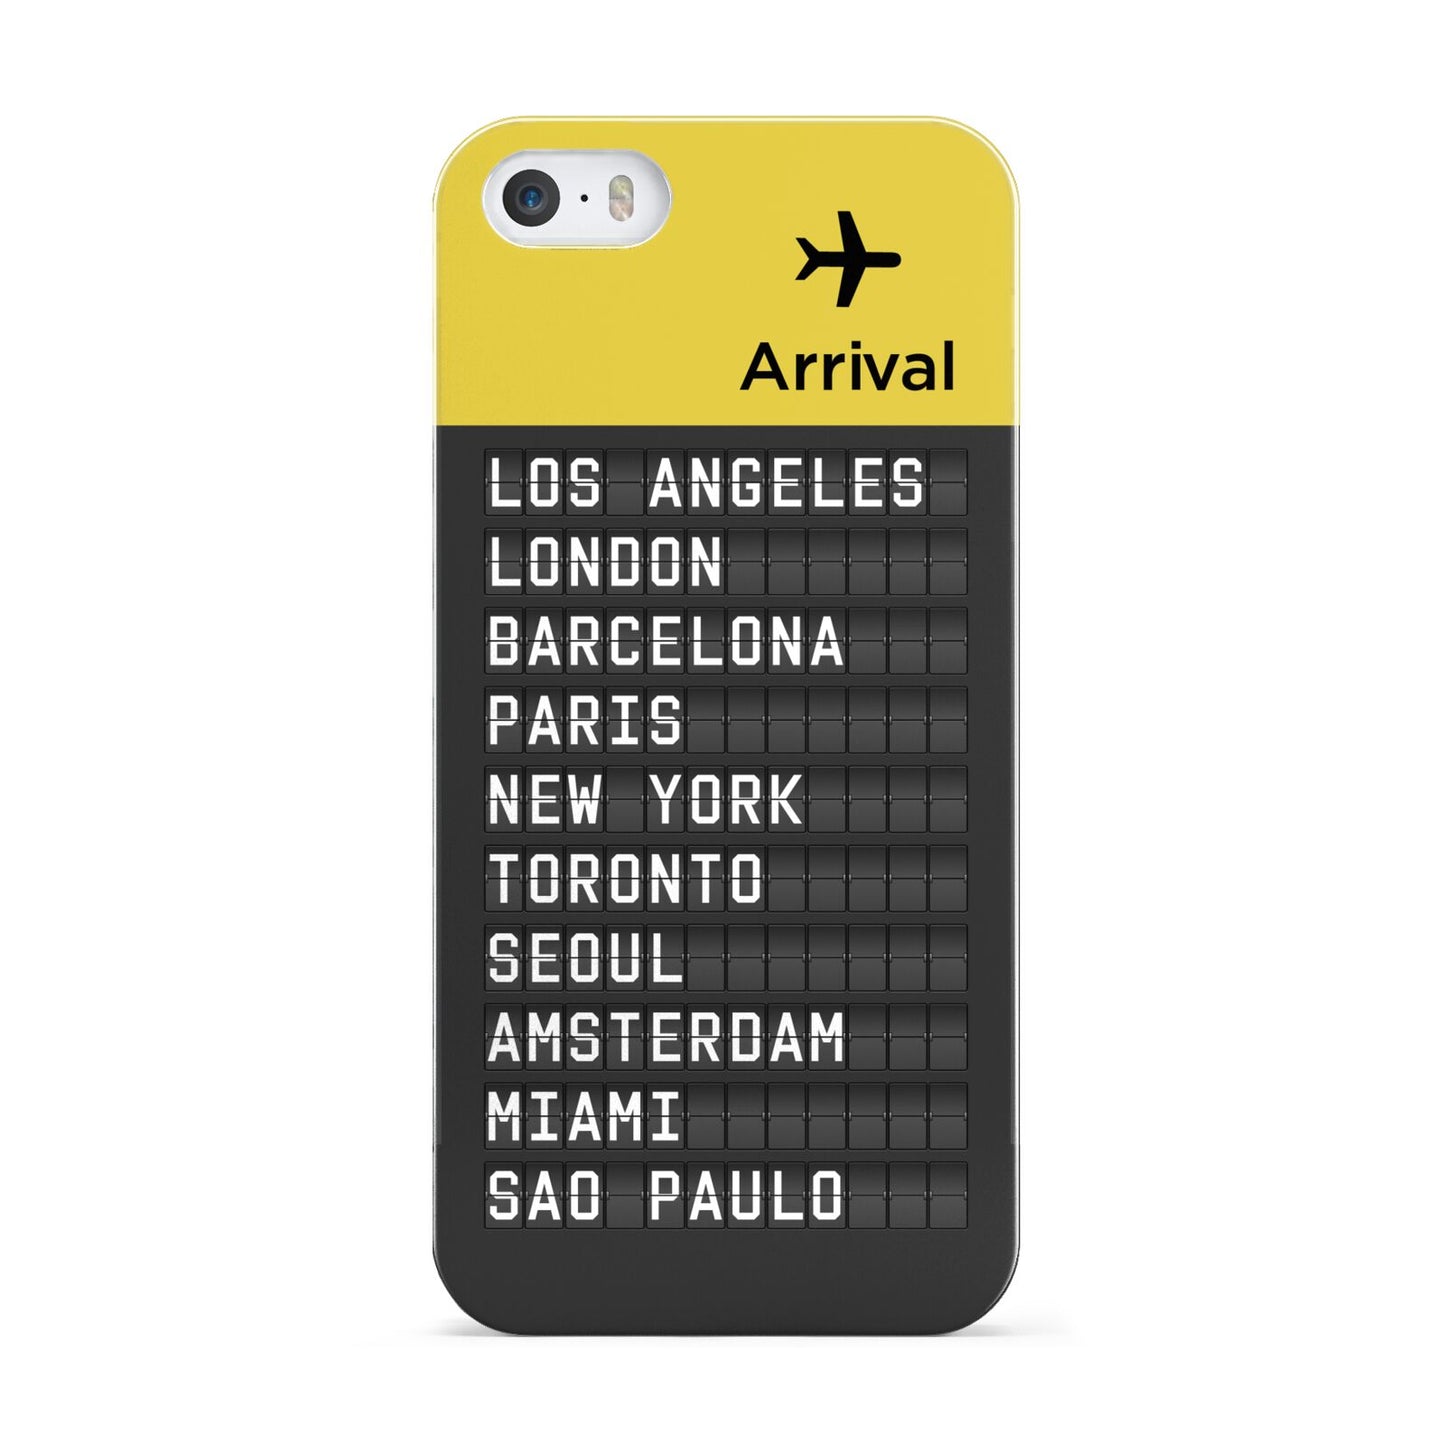 Airport Arrivals Board Apple iPhone 5 Case